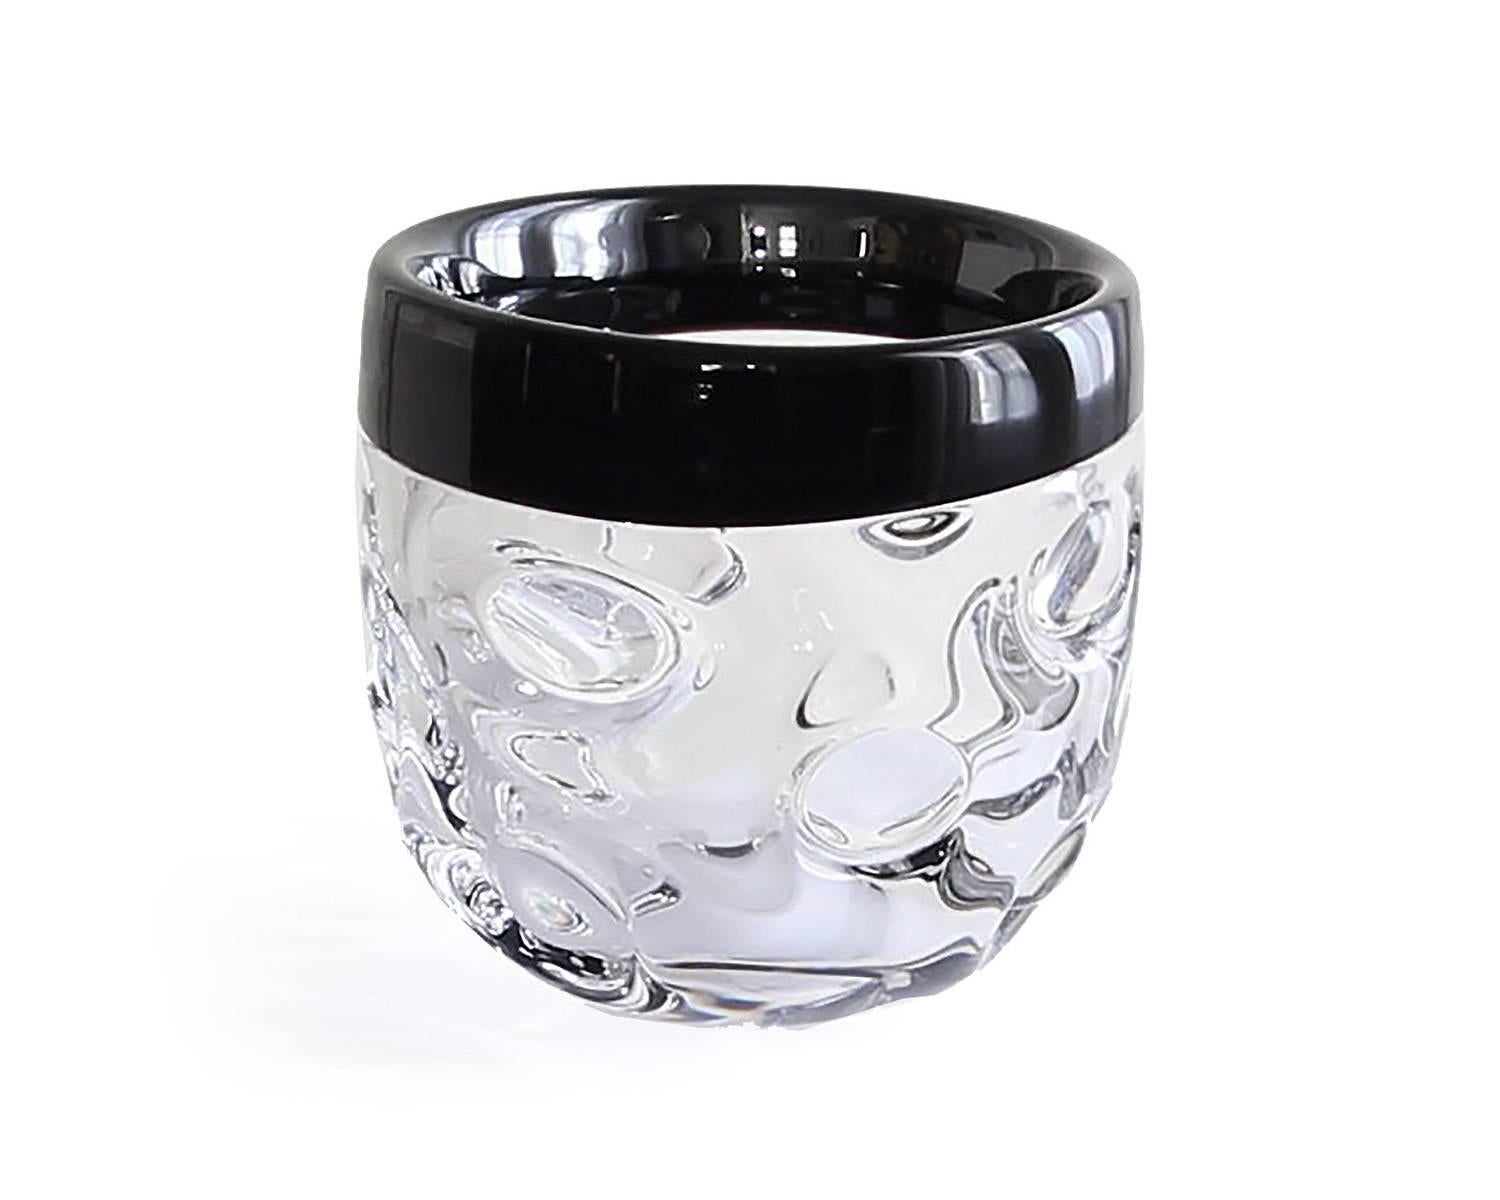 This limited edition, handcrafted crystal bowl was produced by Studio Glashyttan i Åhus AB in Sweden in 2001. The design, weight and finish of the piece all support a modern sensibility for the piece and it is in excellent condition. Edition 10 of